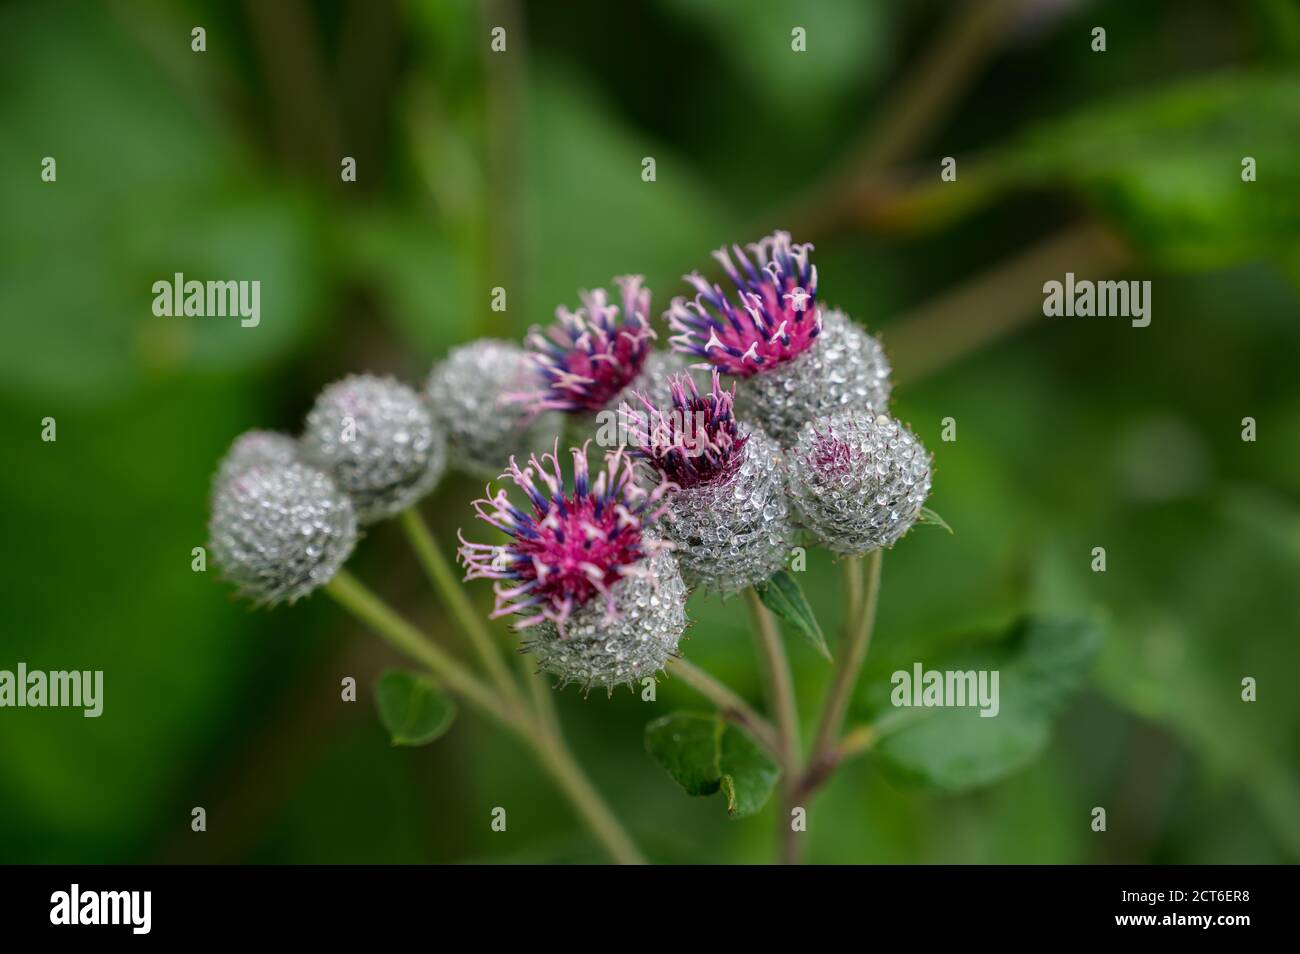 Flowers of Great Burdock (Arctium lappa). Selective focus with shallow depth of field. Stock Photo